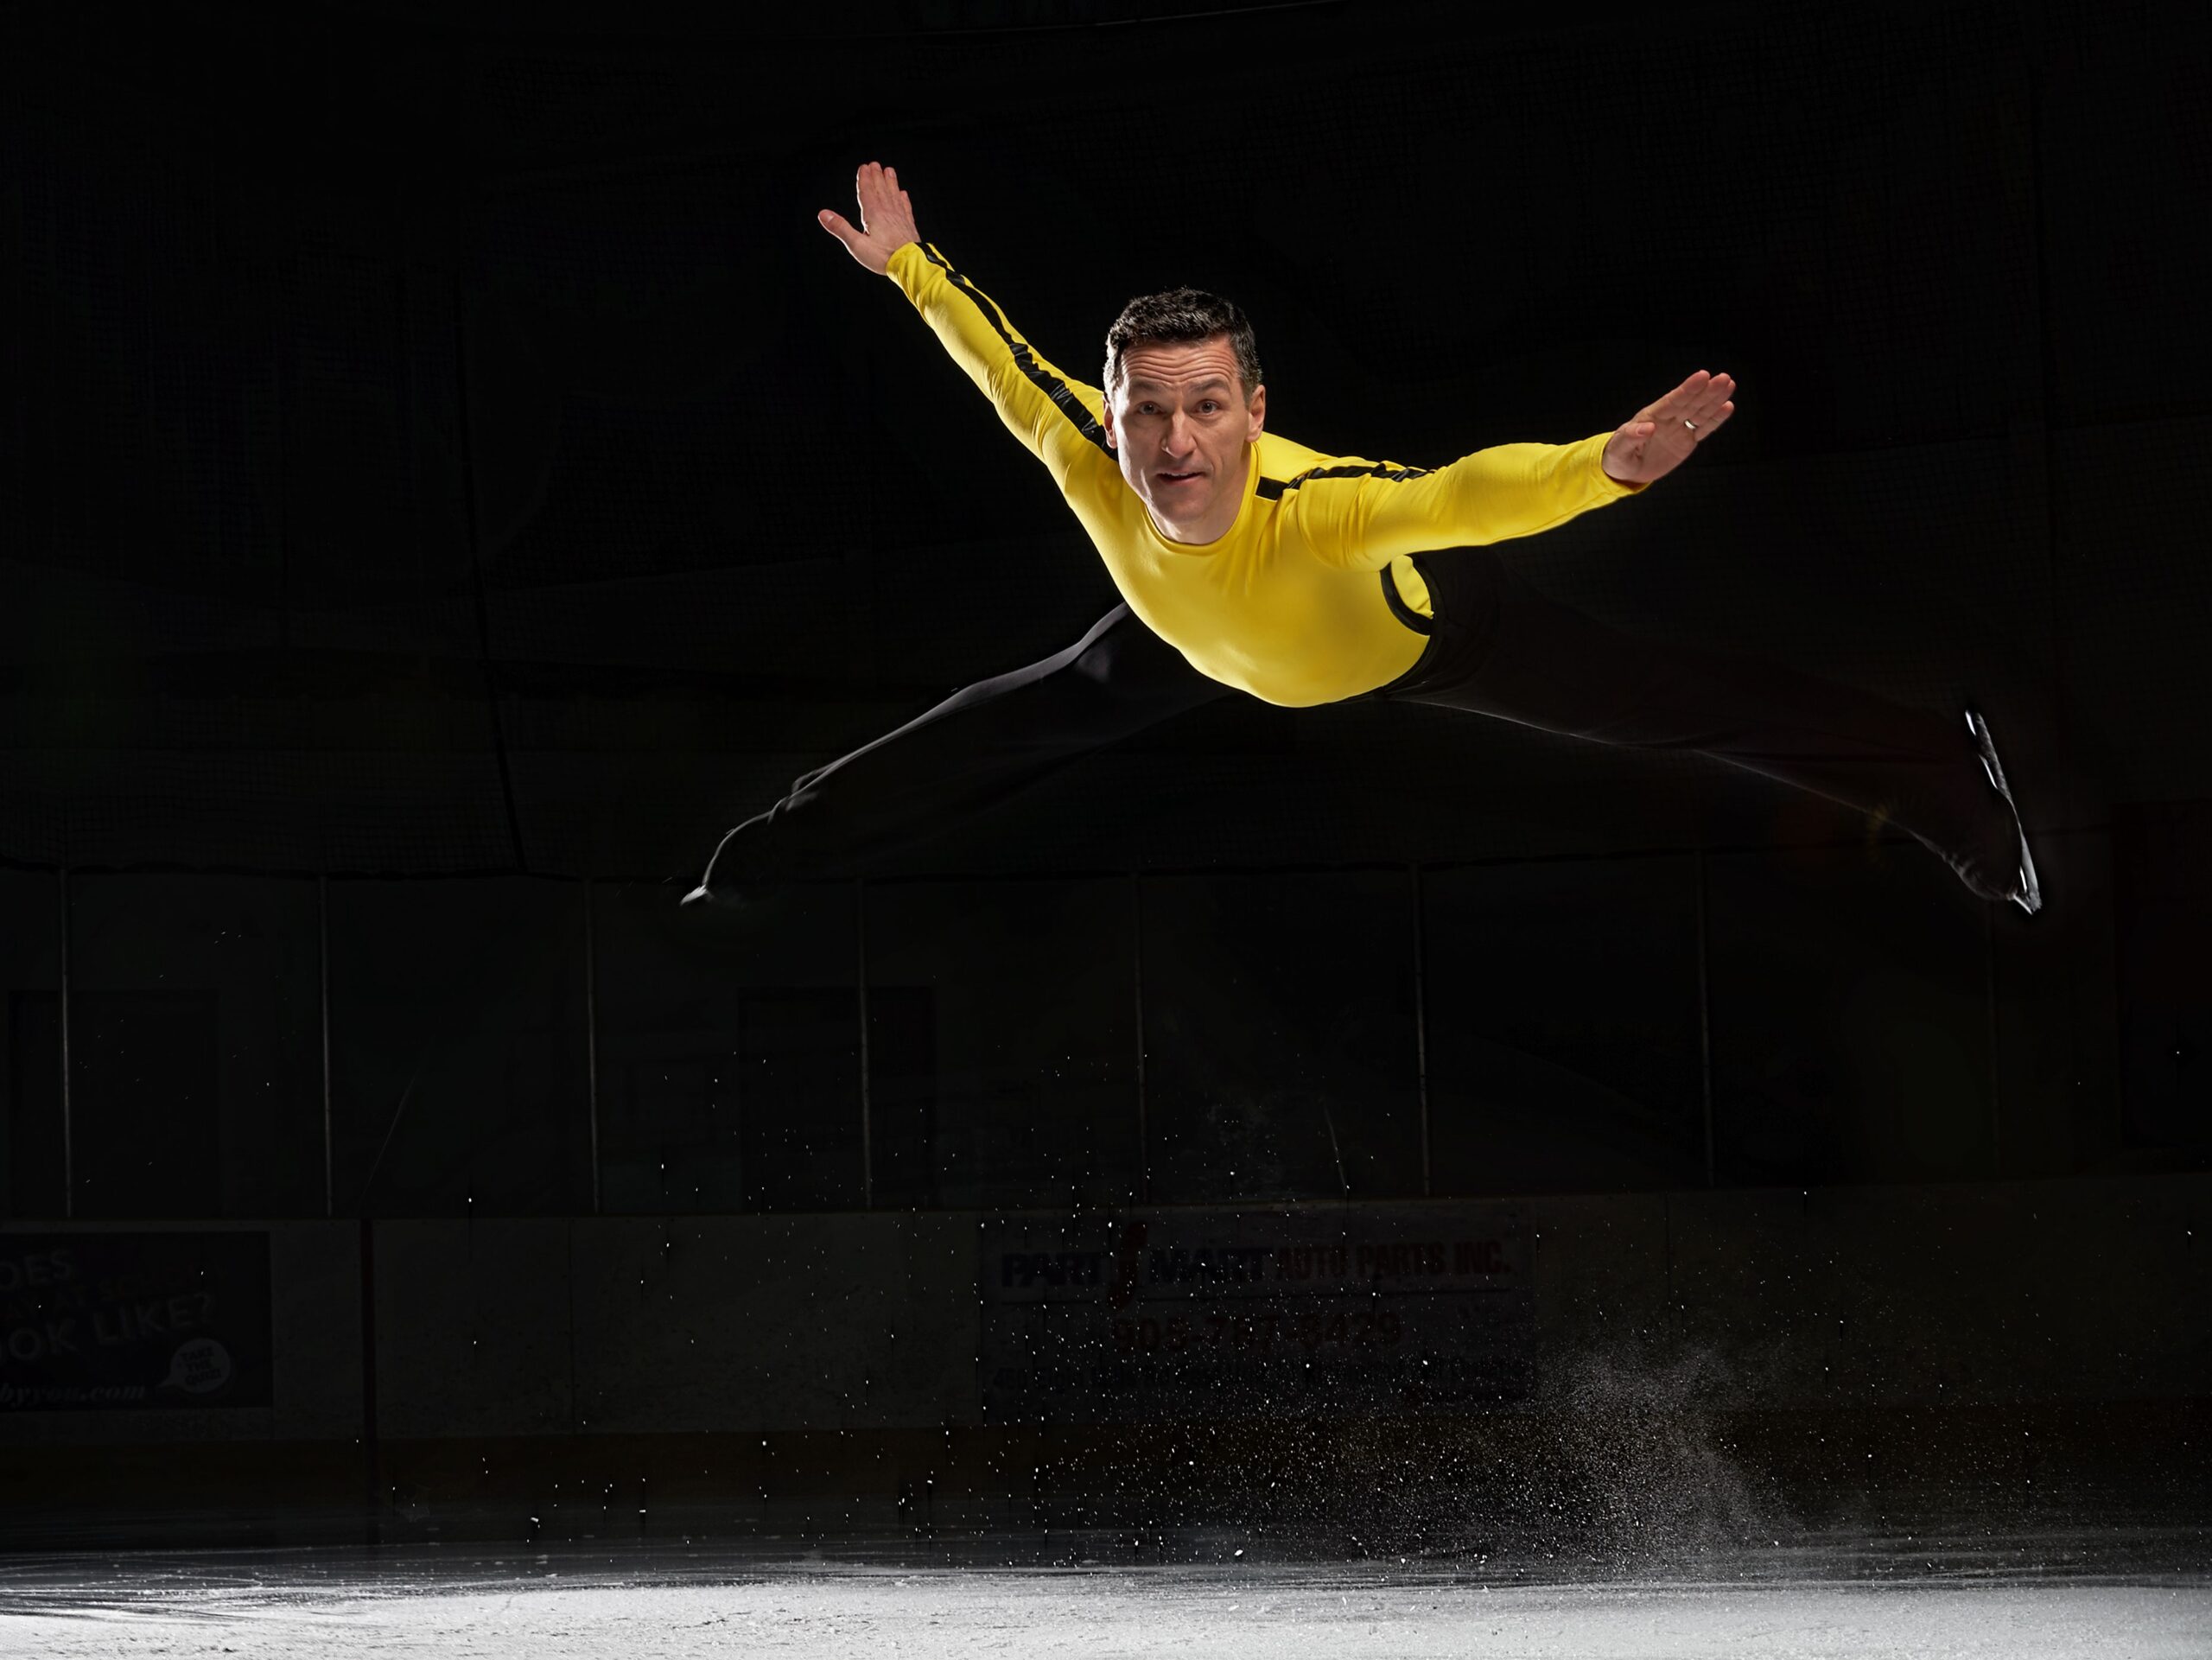 Elvis Stojko jumping high from the ice with arms spread, black background